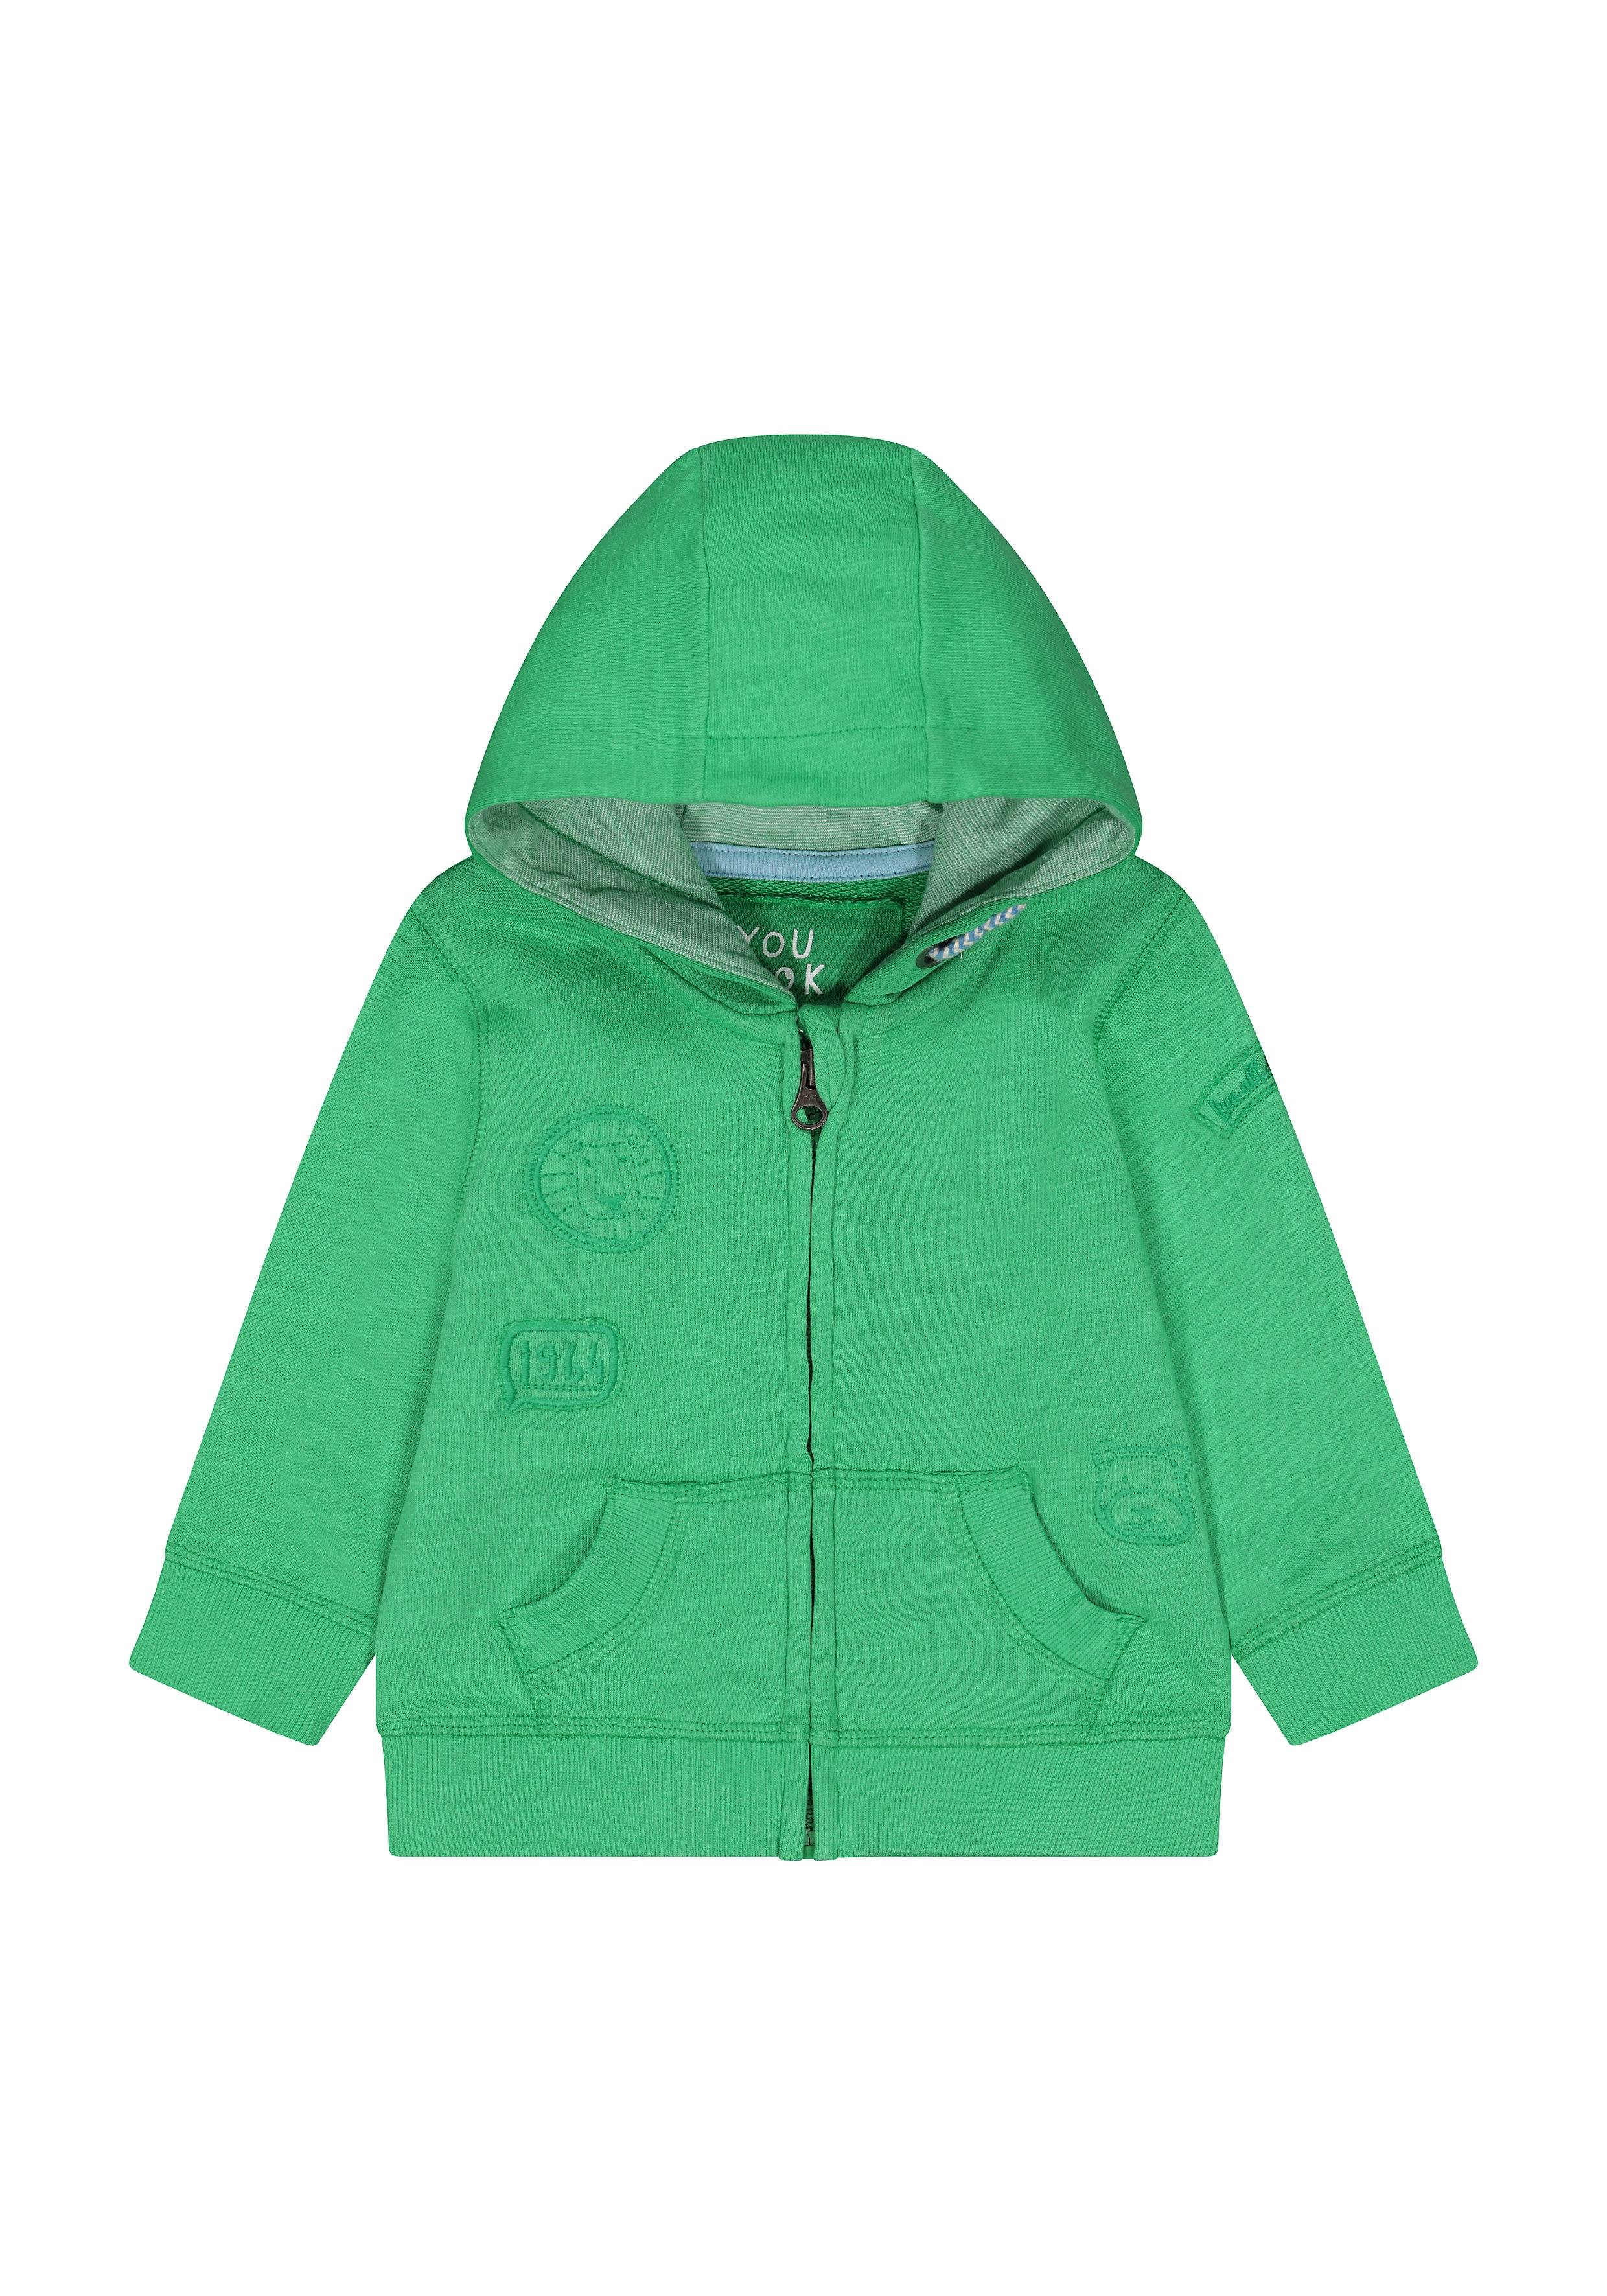 Mothercare | Boys Full Sleeves Sweatshirt Embroidered - Green